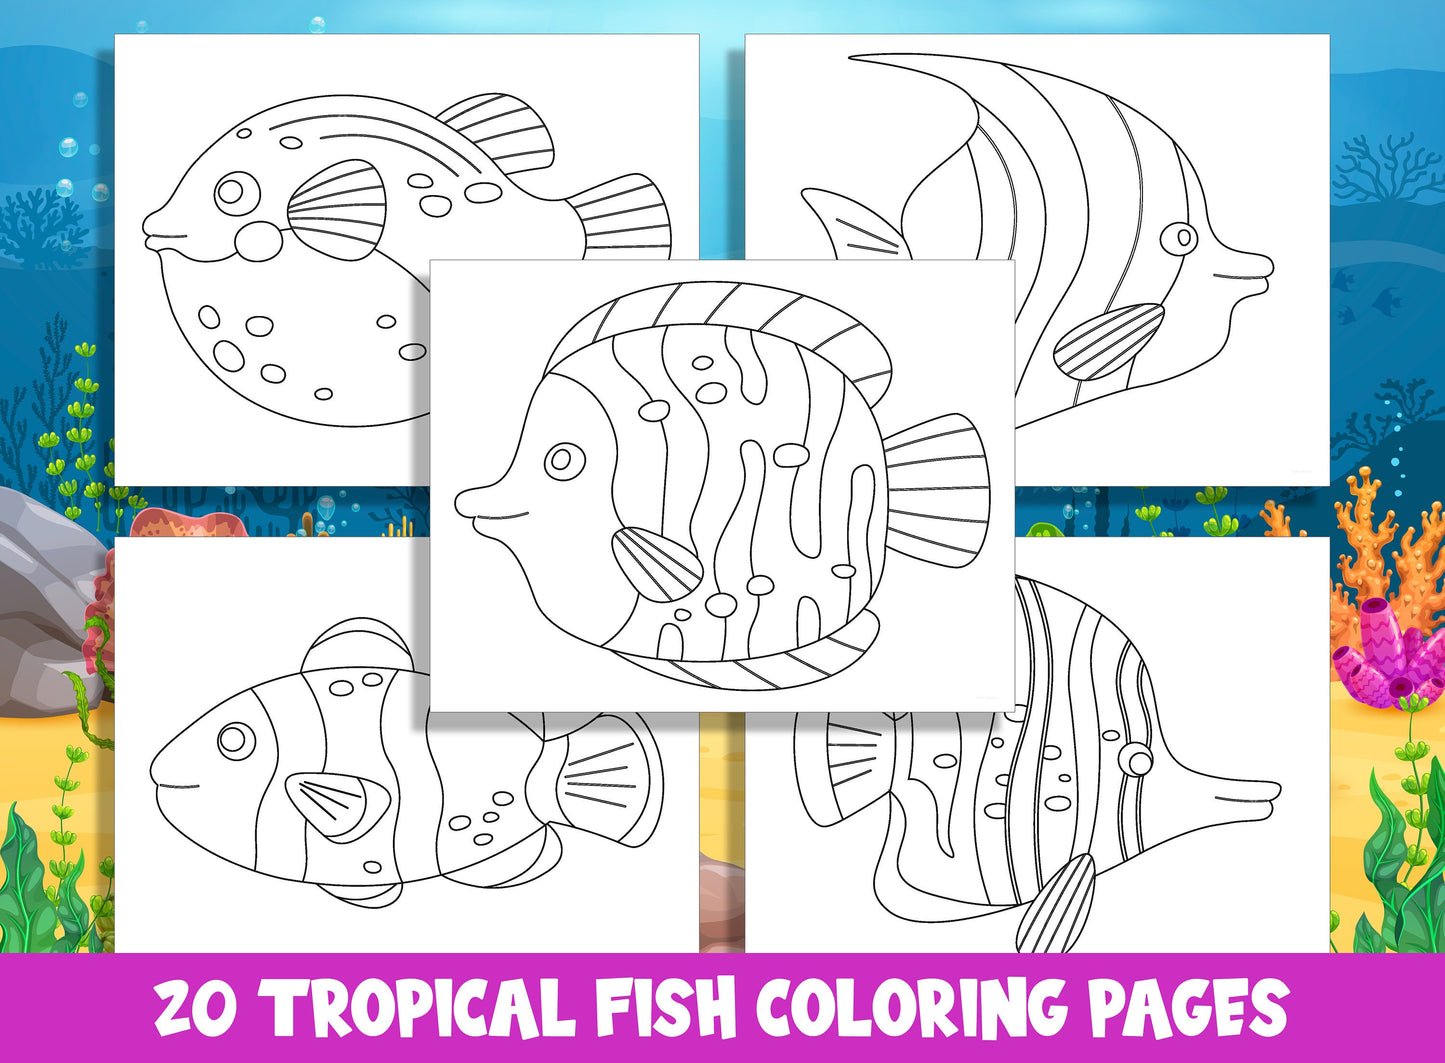 Tropical Fish Coloring Pages: 20 Fun and Educational Sheets for Preschool and Kindergarten, PDF File, Instant Download